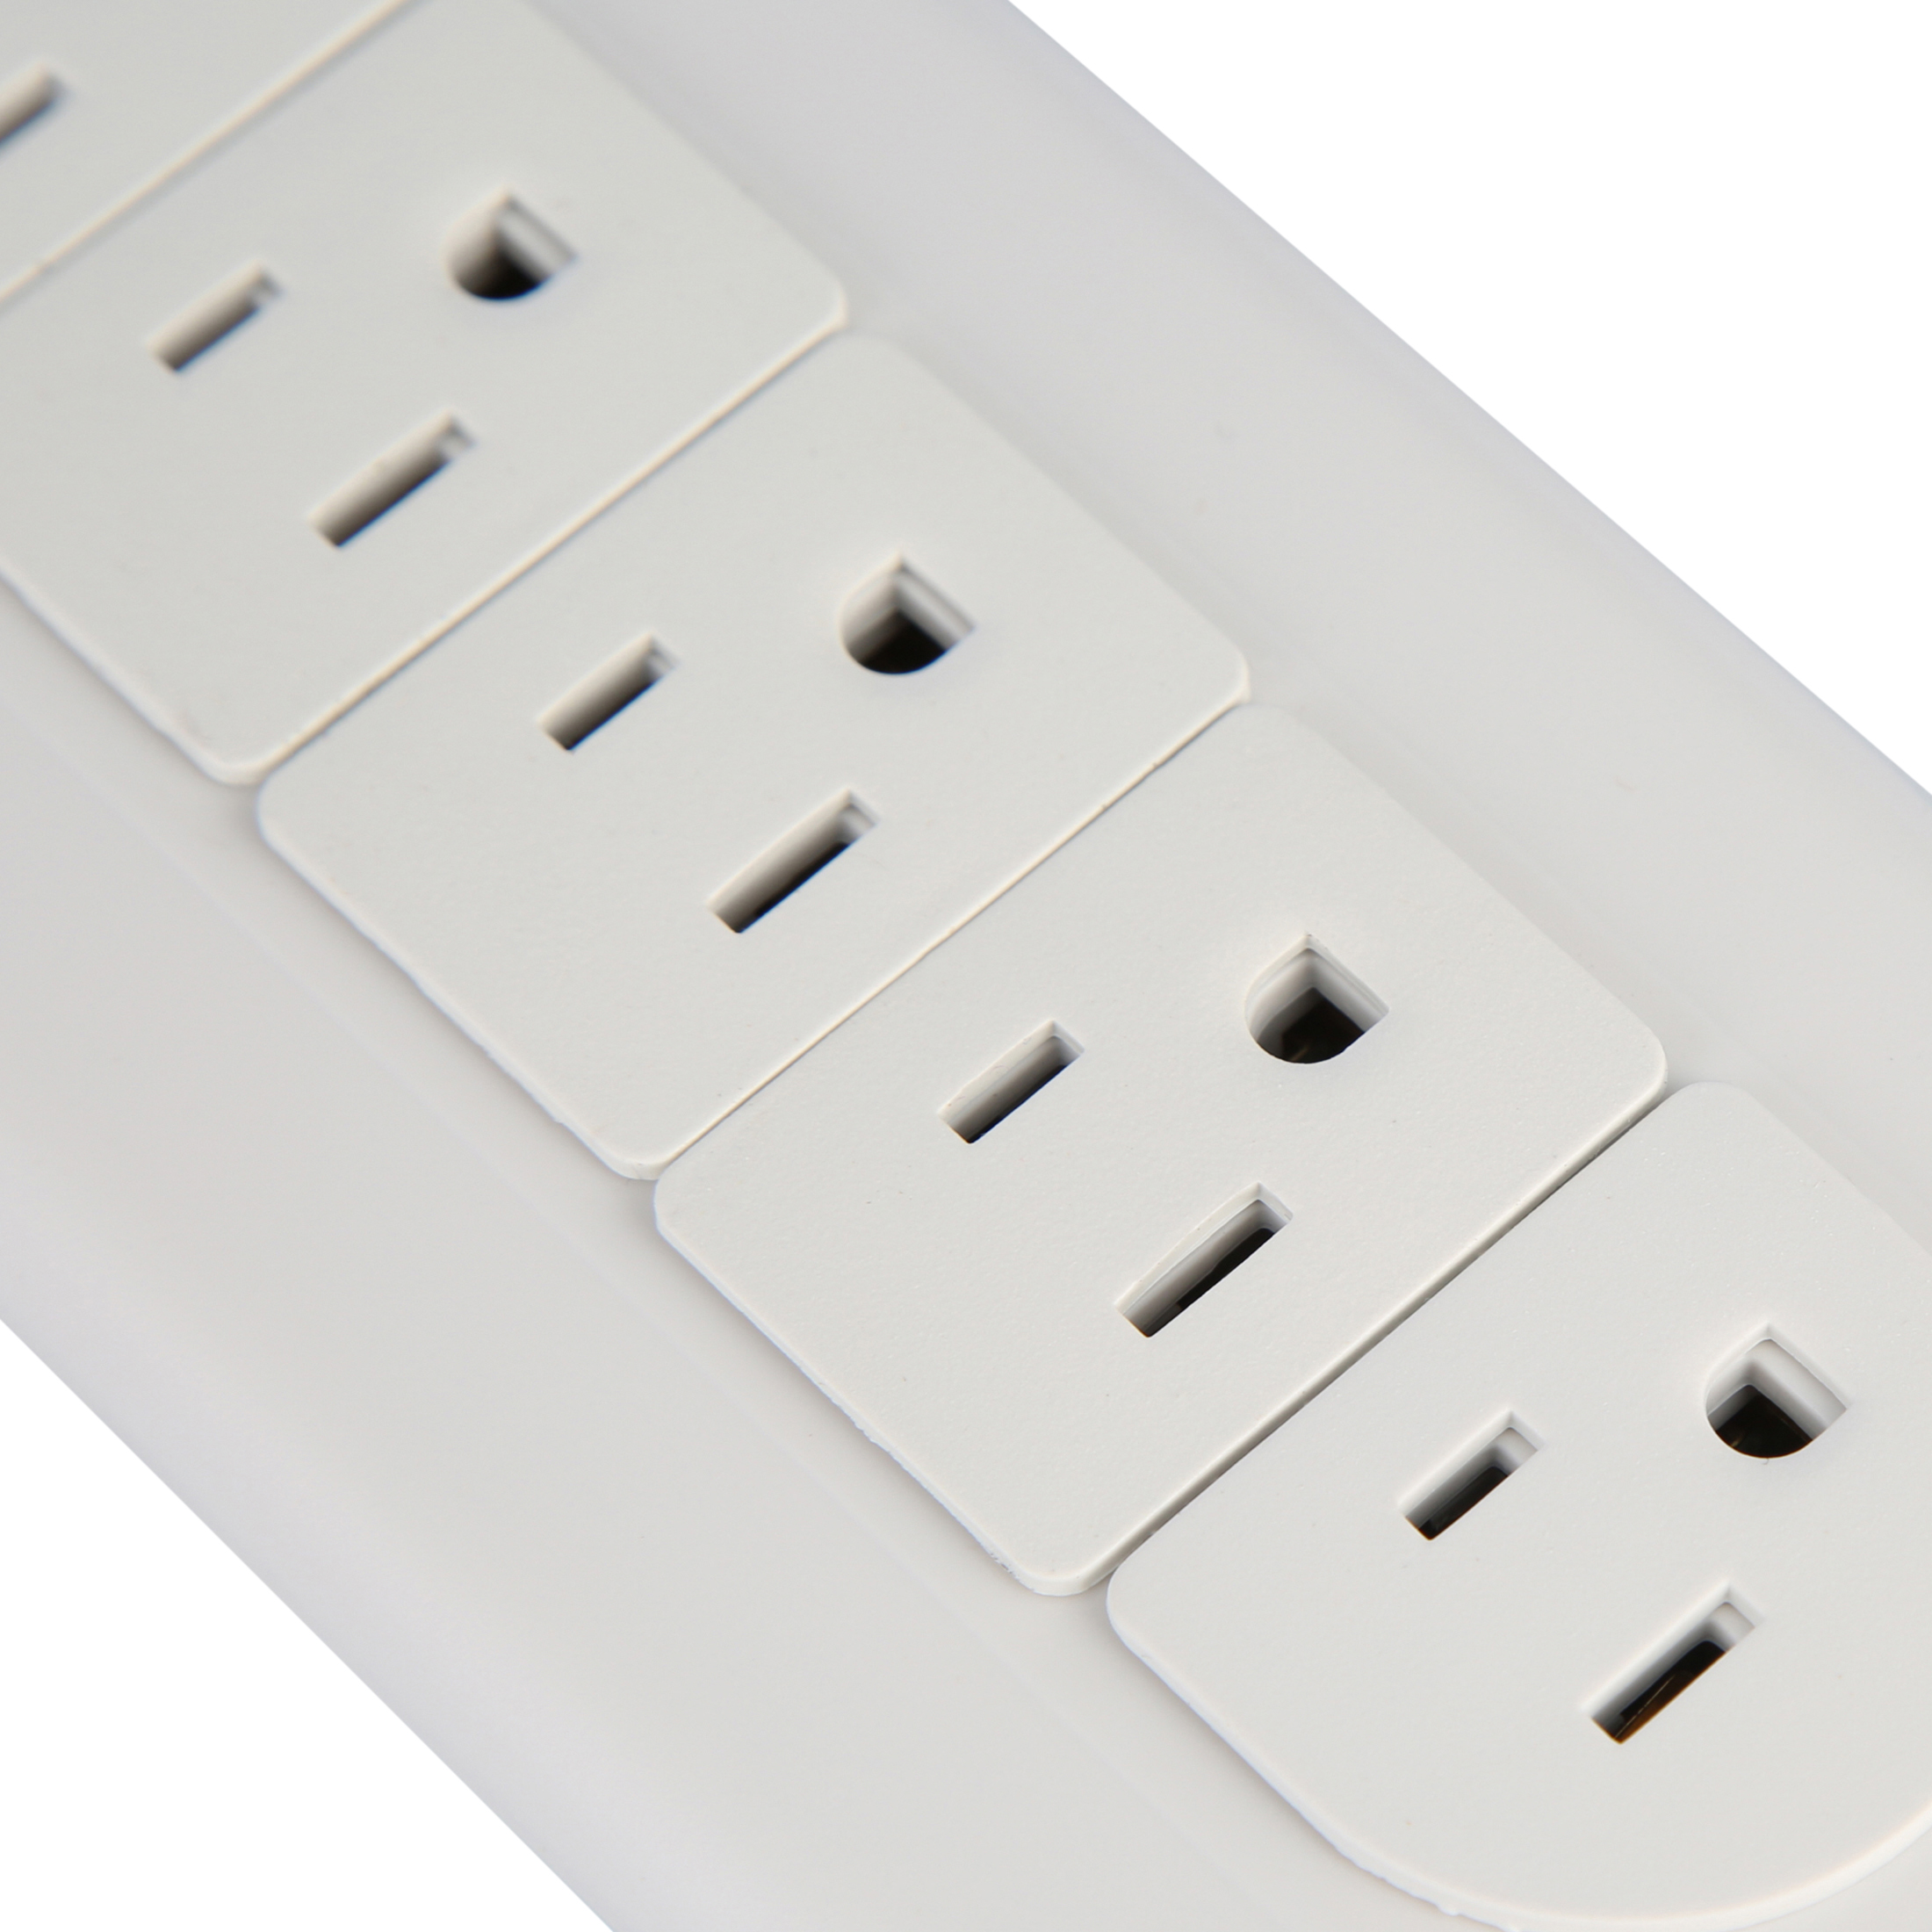 Belkin SurgeMaster Home Series Surge Protector 7-Outlet Strip, 6 ft Cord - image 3 of 7